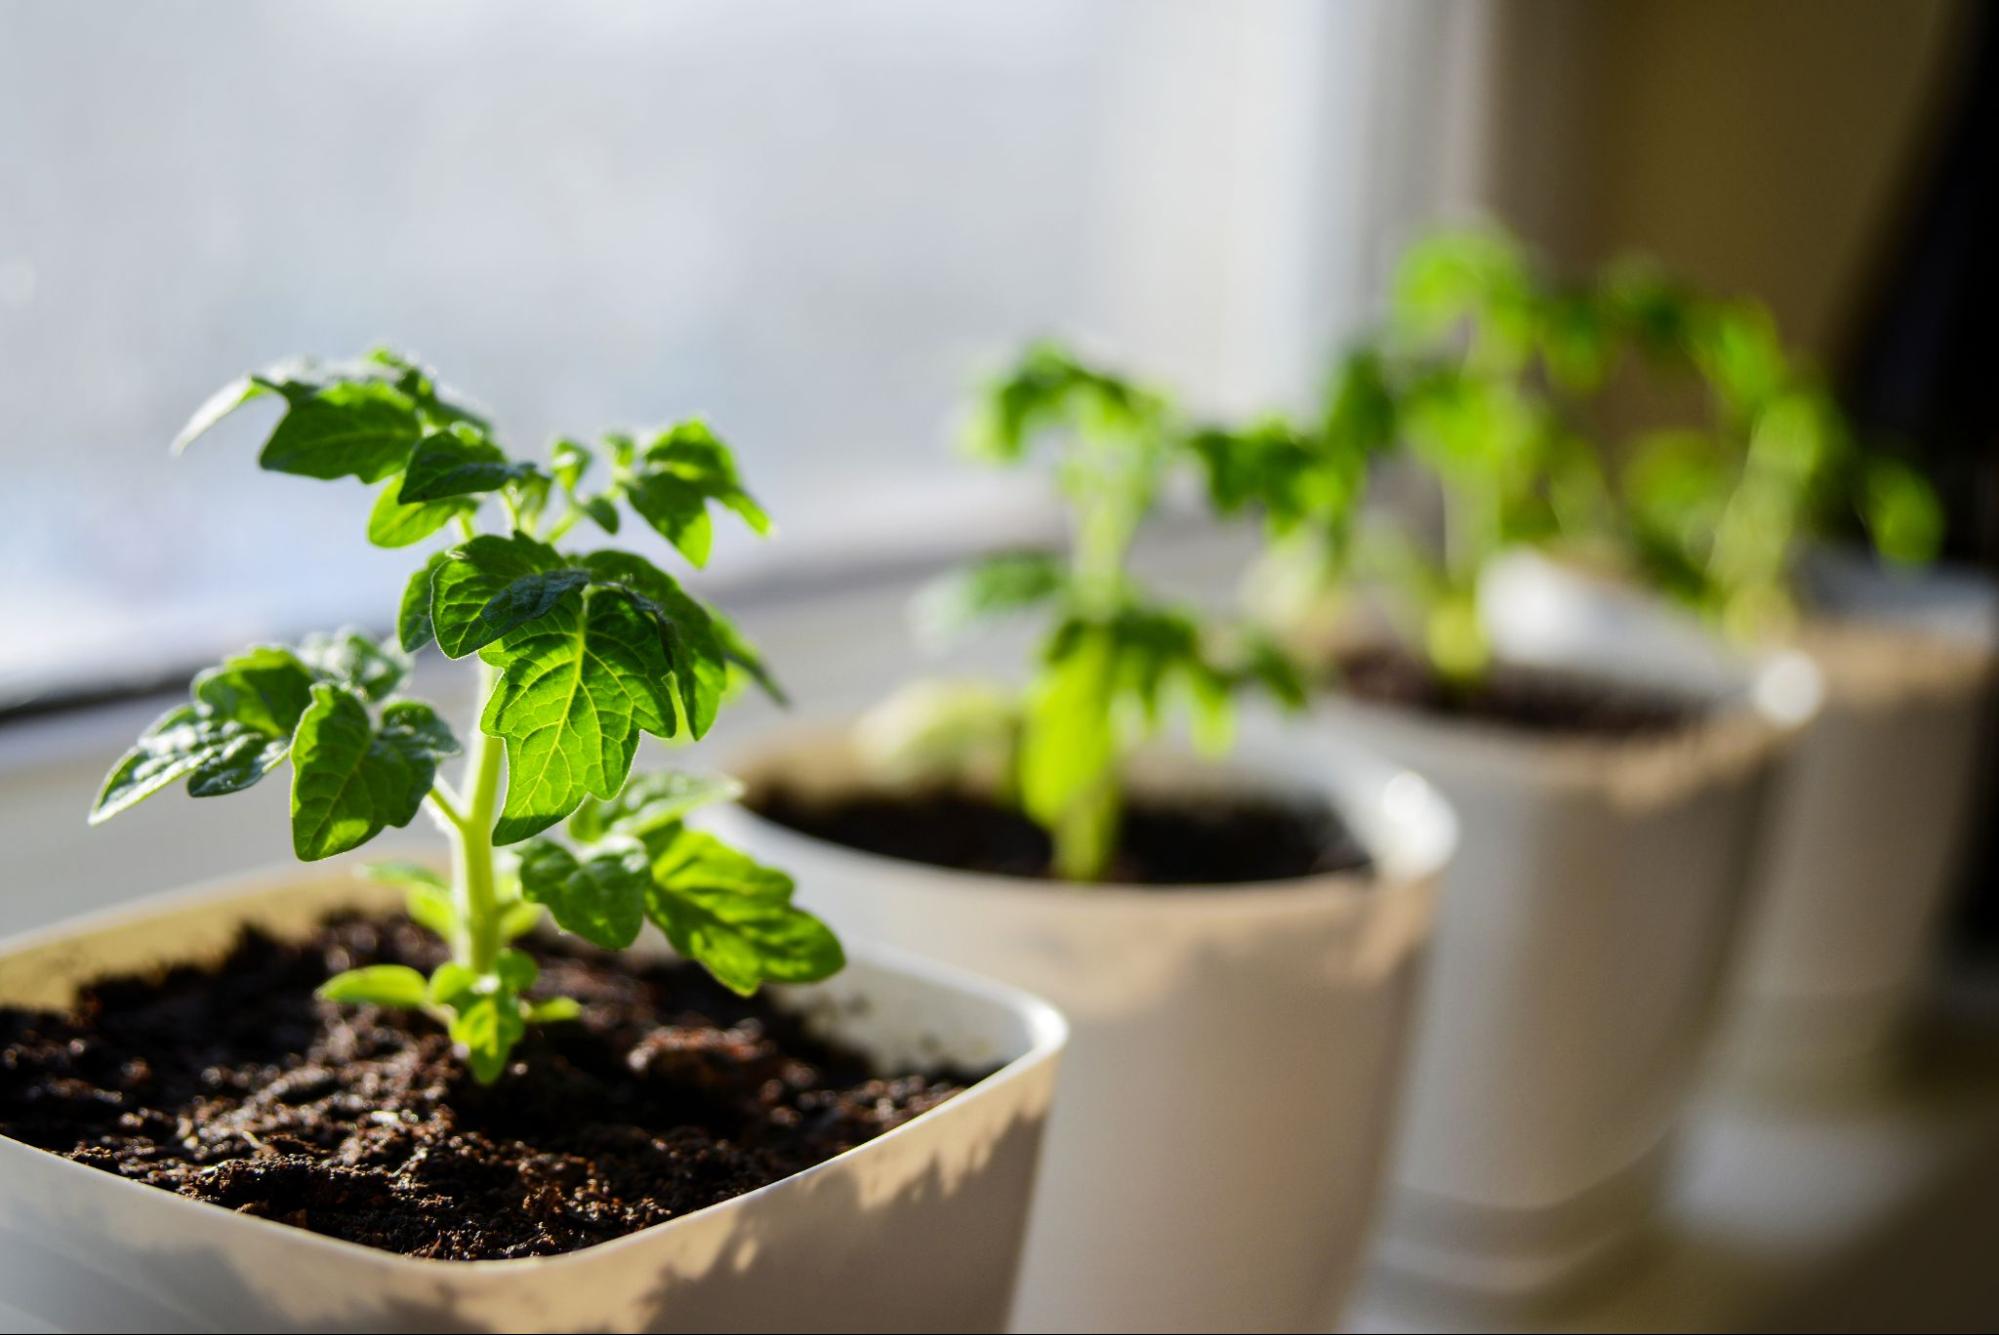 Growing different types of tomatoes on a windowsill from seed.